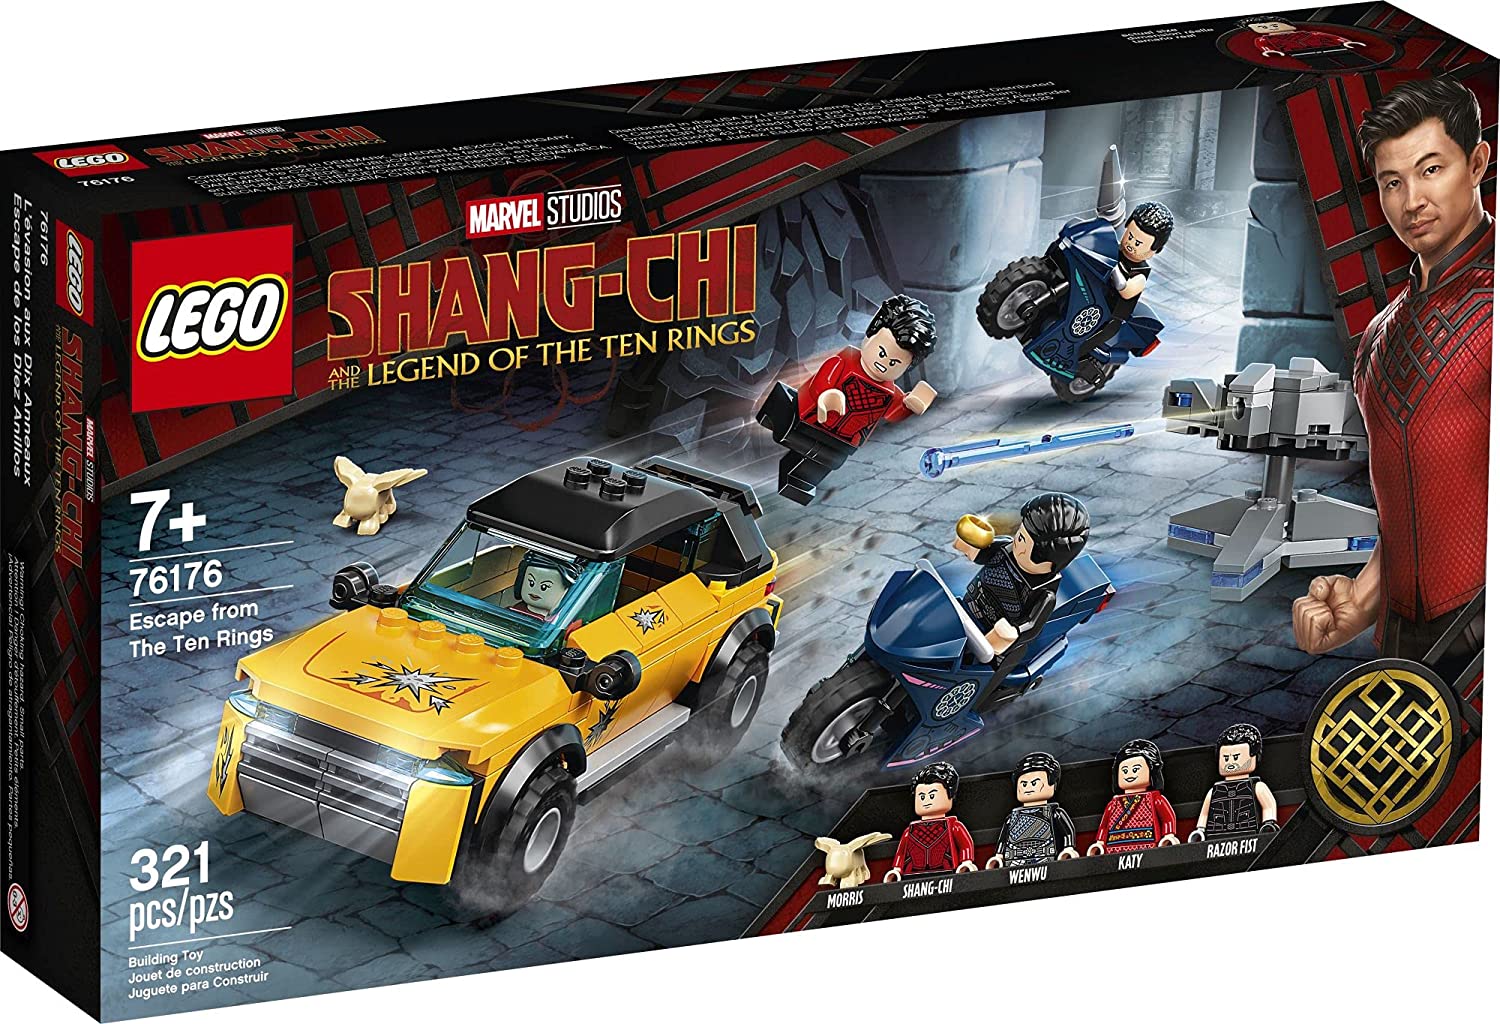 LEGO® Marvel Shang-Chi Escape from The Ten Rings 76176 Building Kit (321 Pieces)